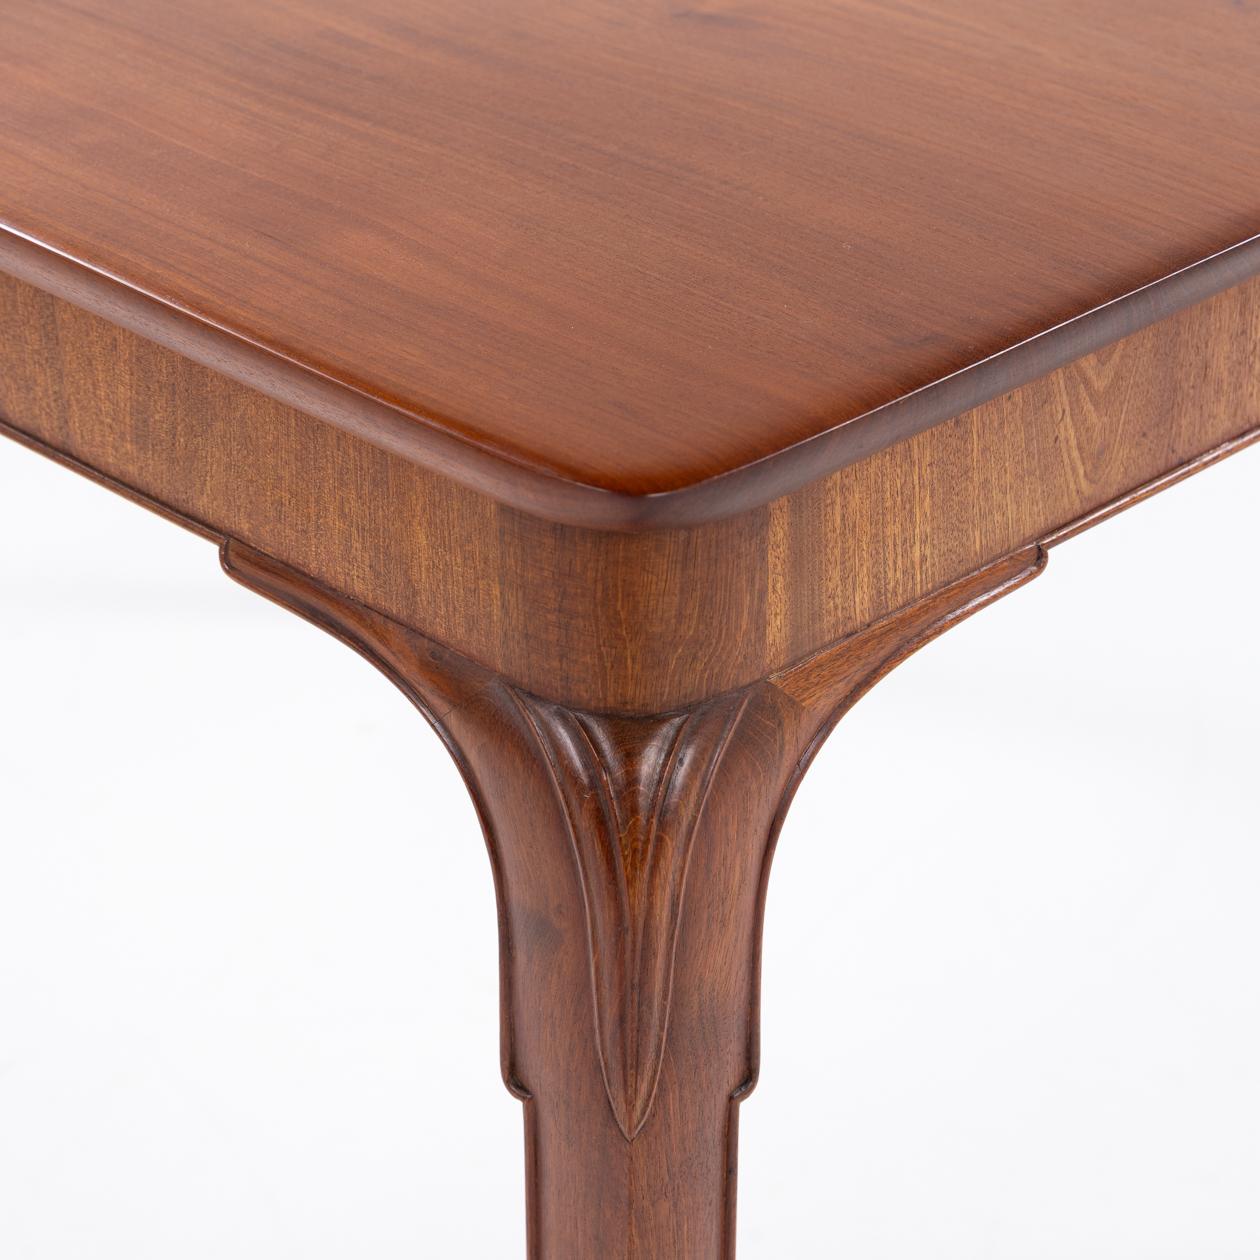 Small dining table in solid mahogany by Frits Henningsen